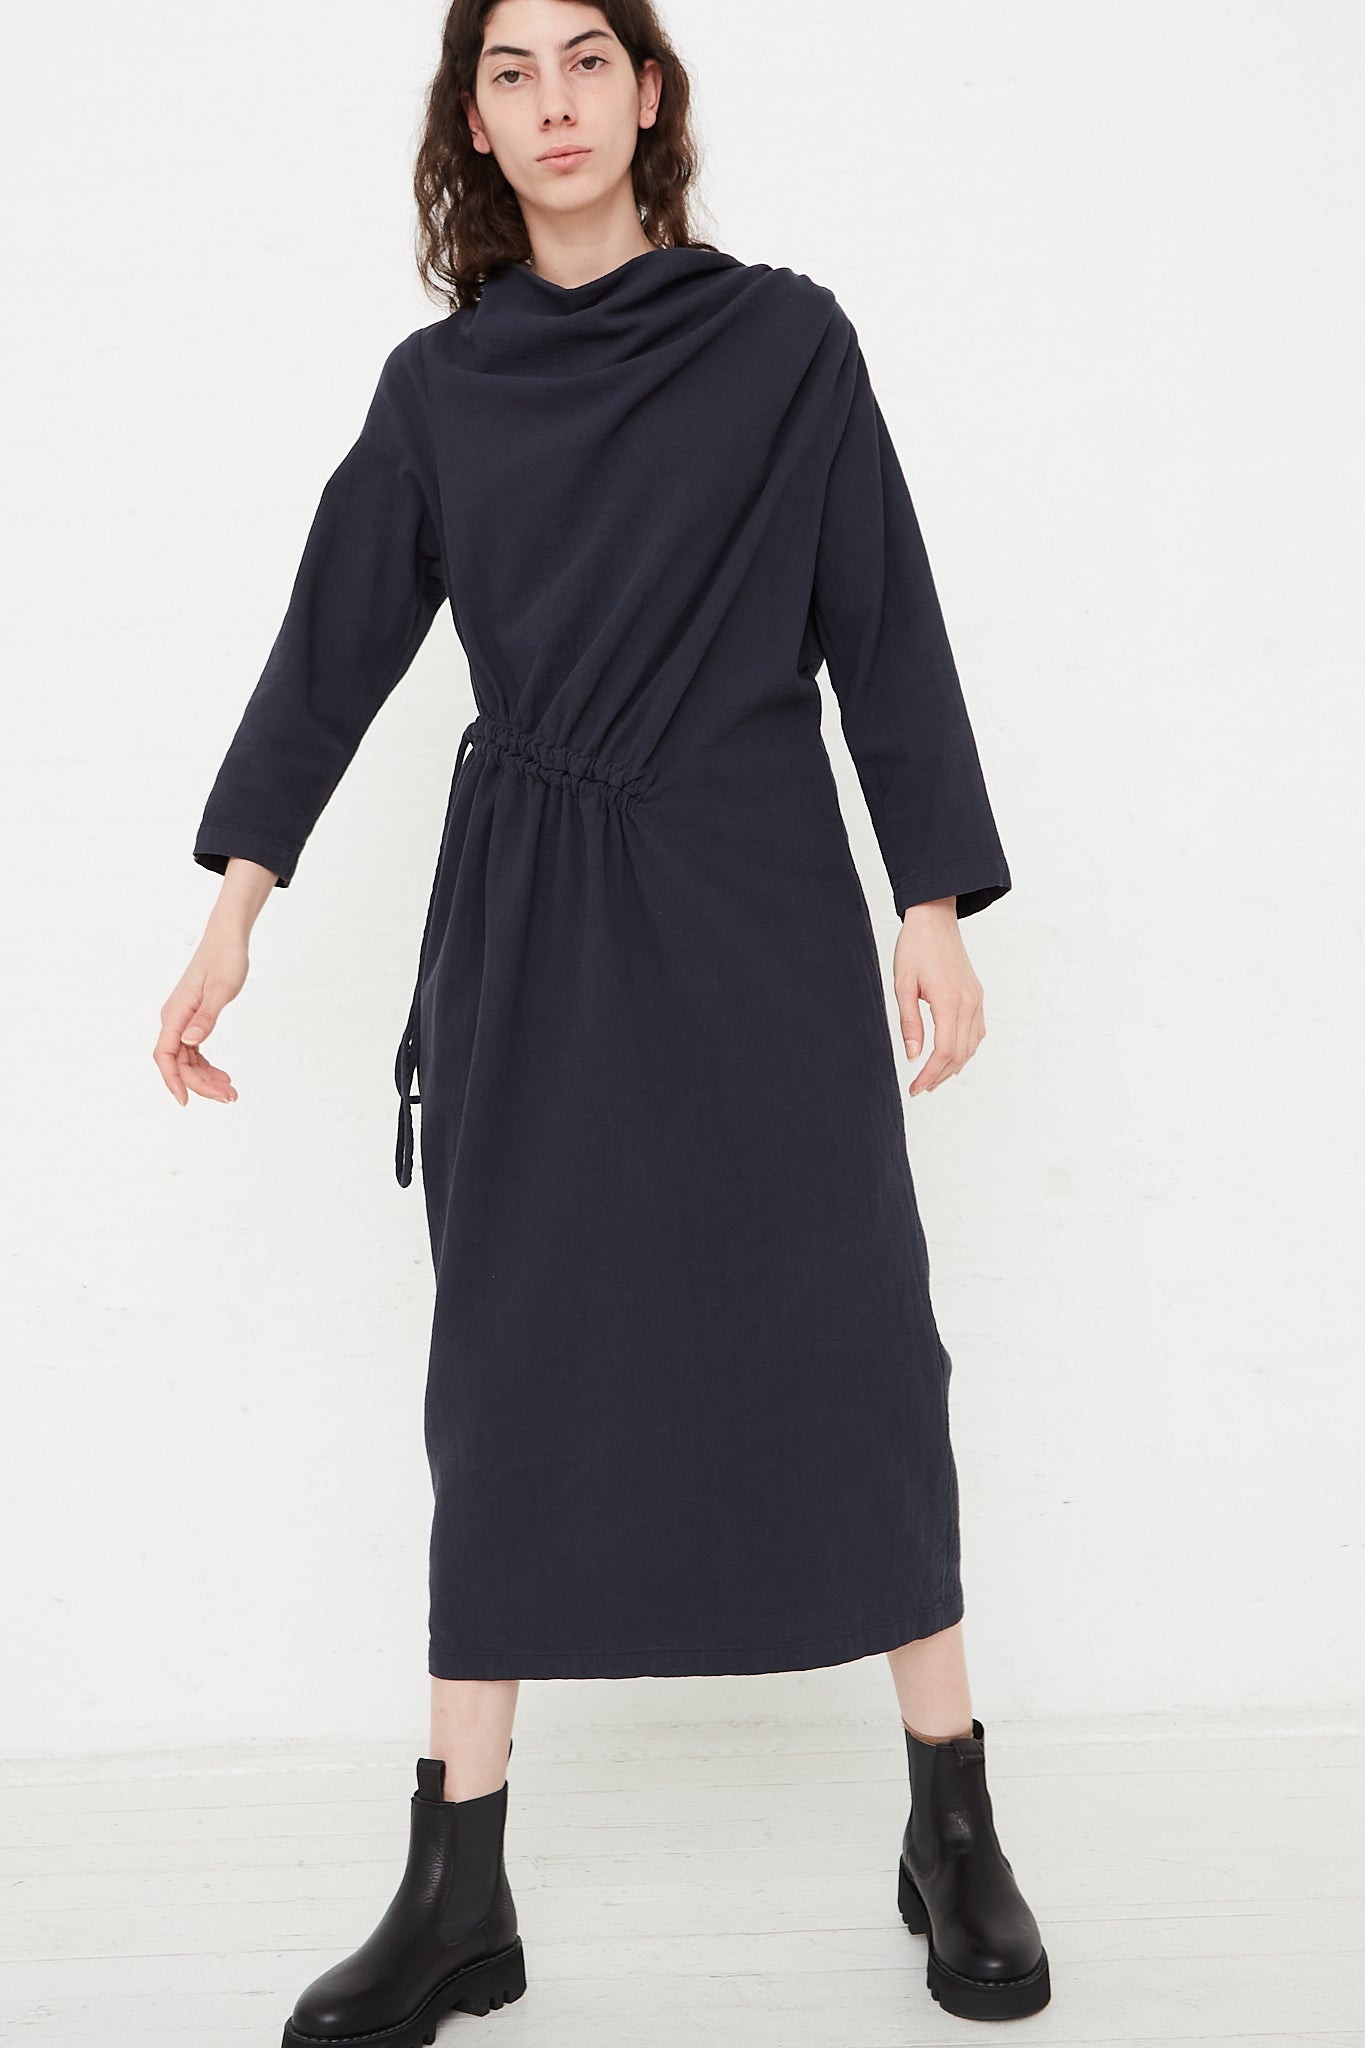 Cotton Woven Ruched Dress in Dark Navy by Black Crane for Oroboro Front